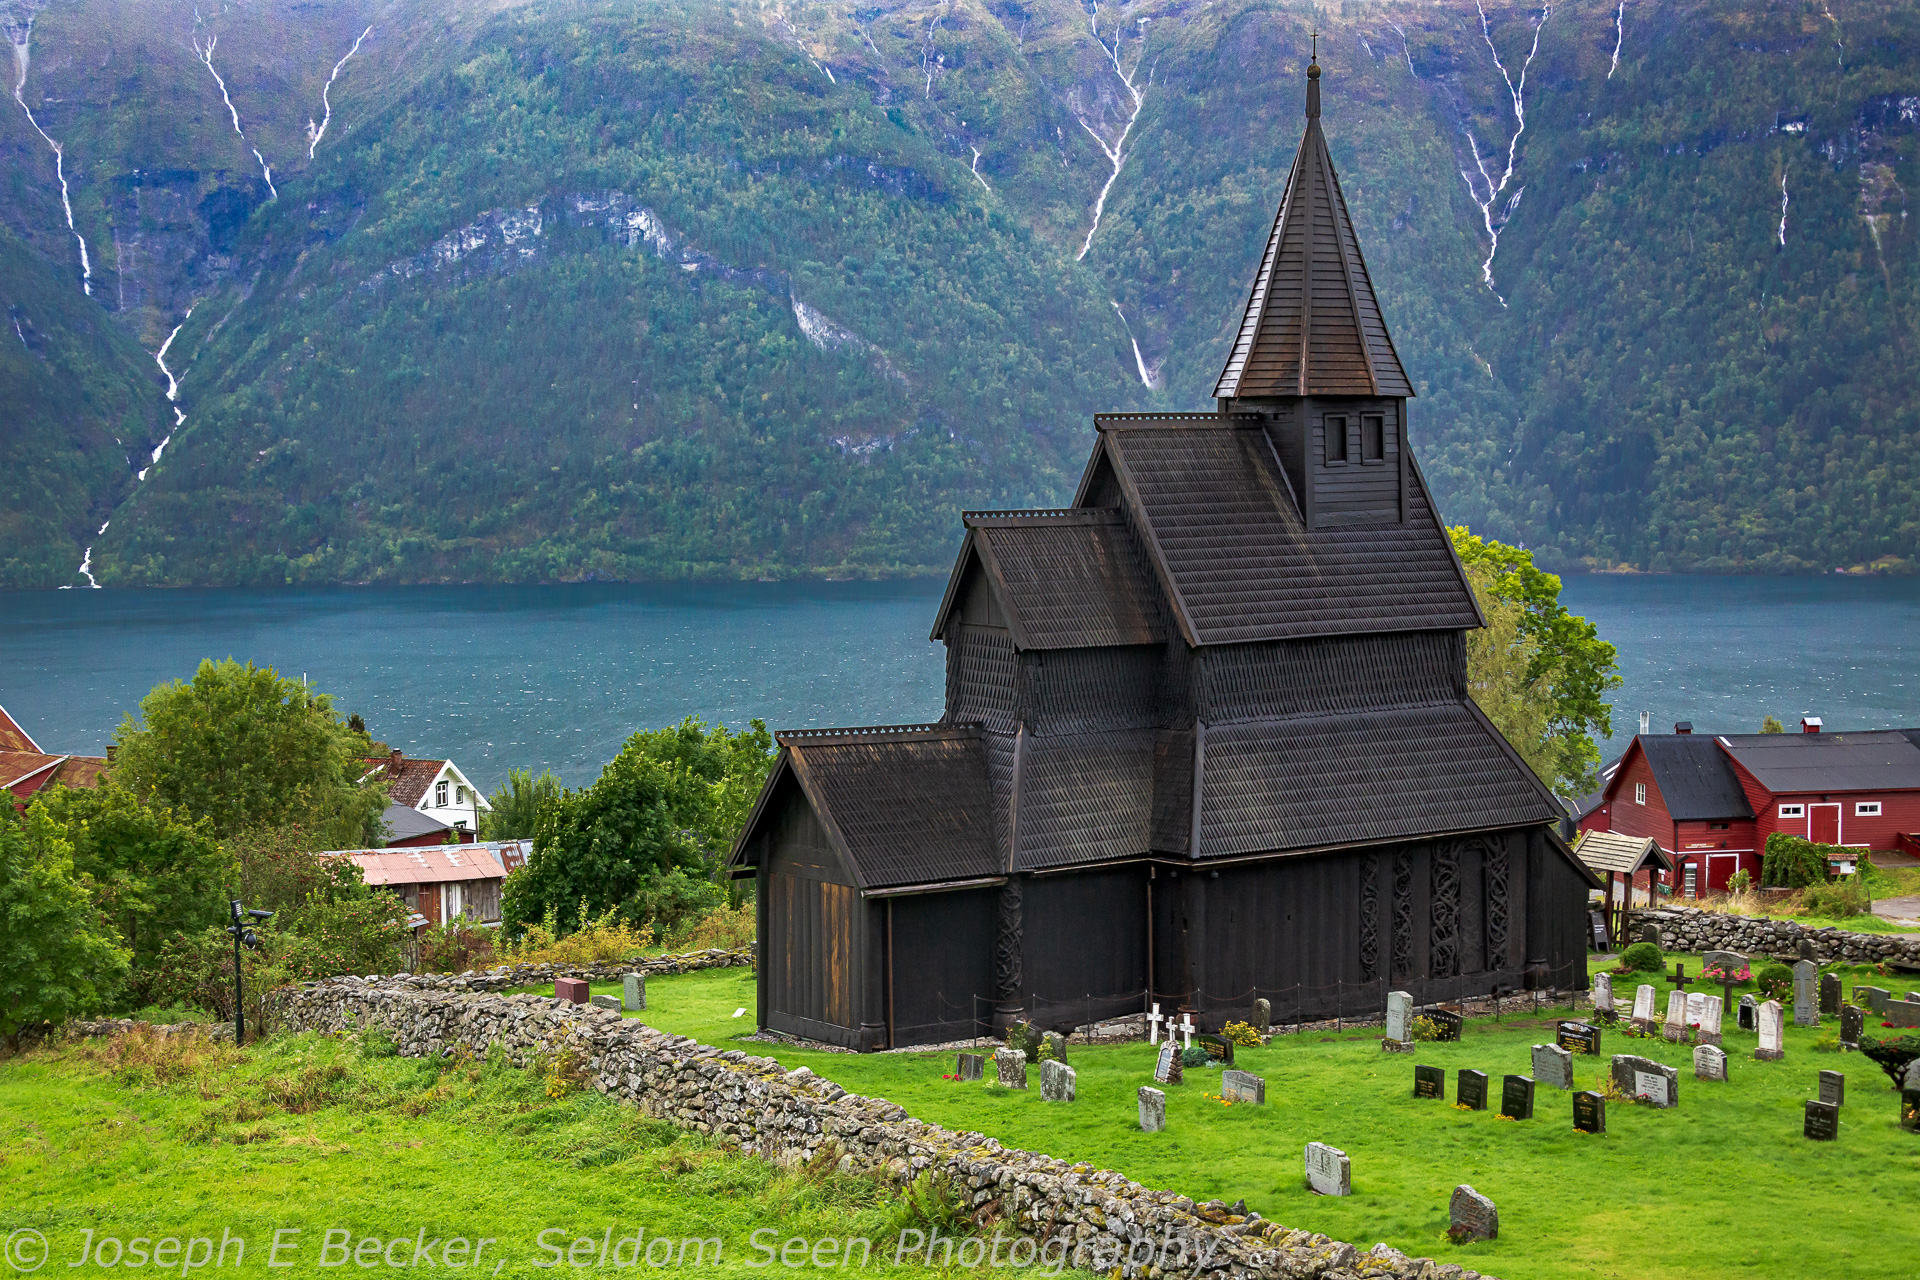 Stave Churches of Norway